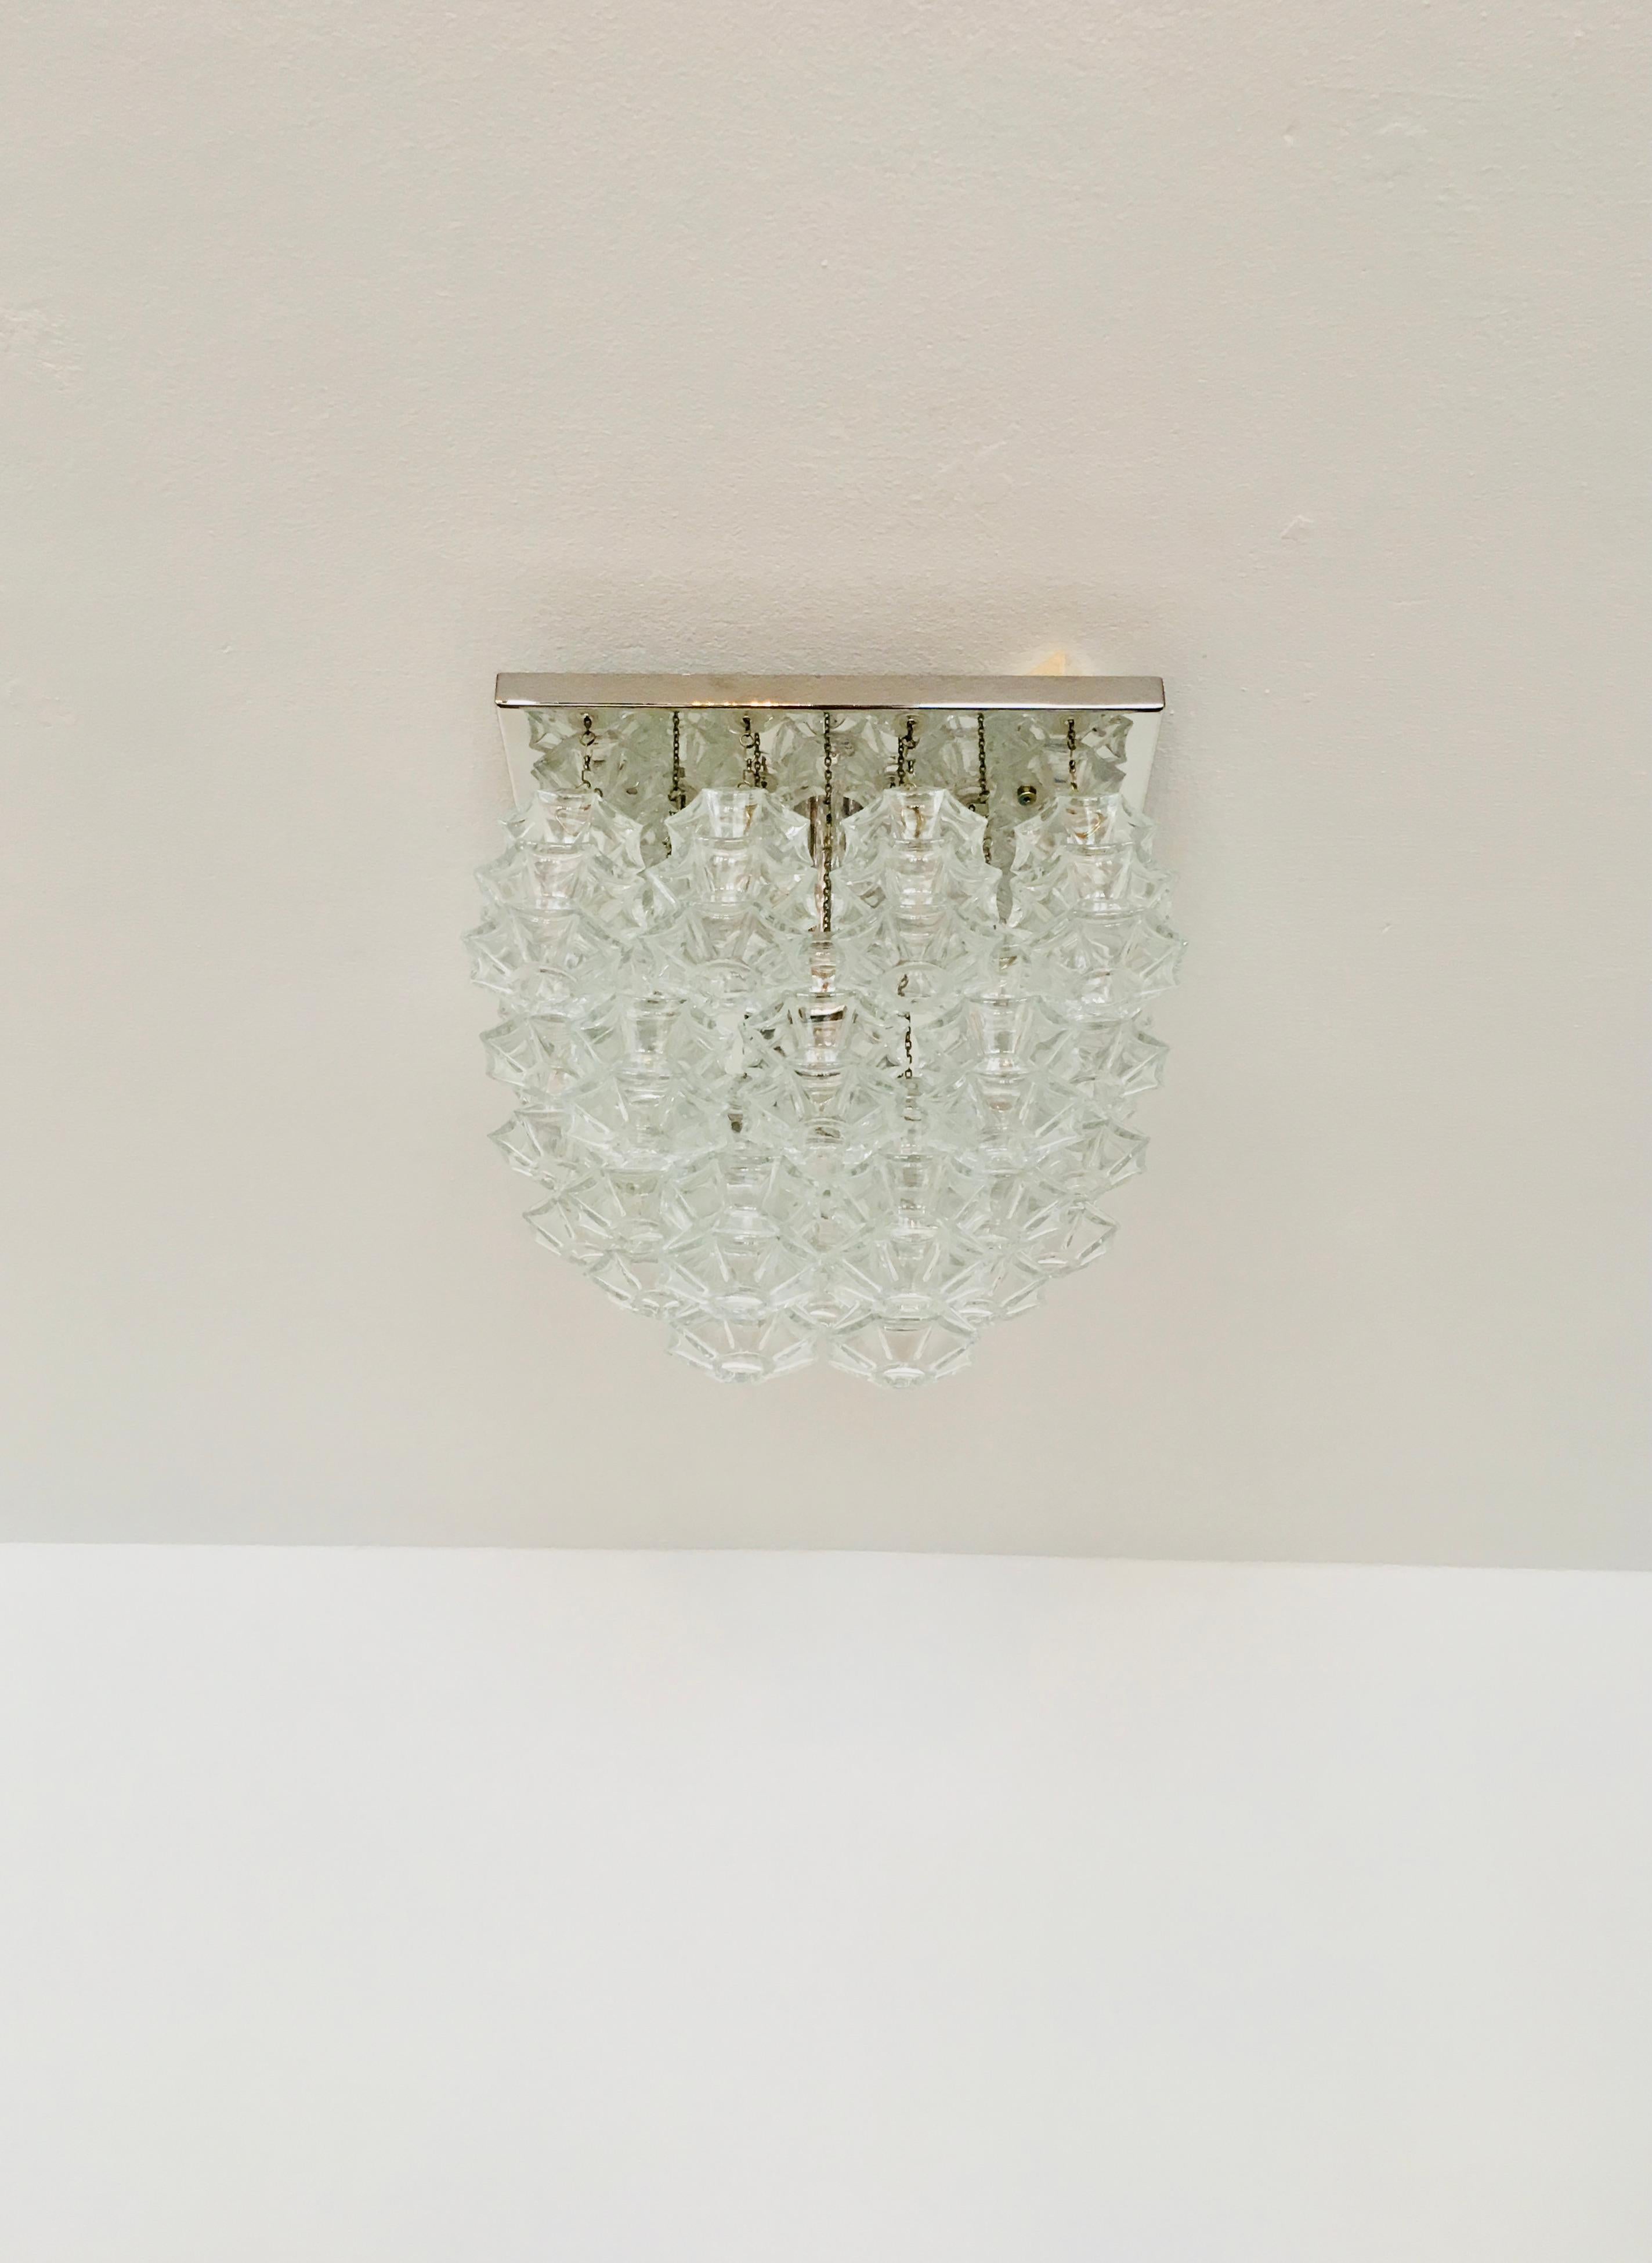 Wonderful ceiling lamp from the 1960s.
The 24 beautifully shaped Murano glass elements create an impressive, sparkling play of light.
Very rare version with 3 rows.
Very high-quality workmanship and a real eye-catcher for every home.

Design: